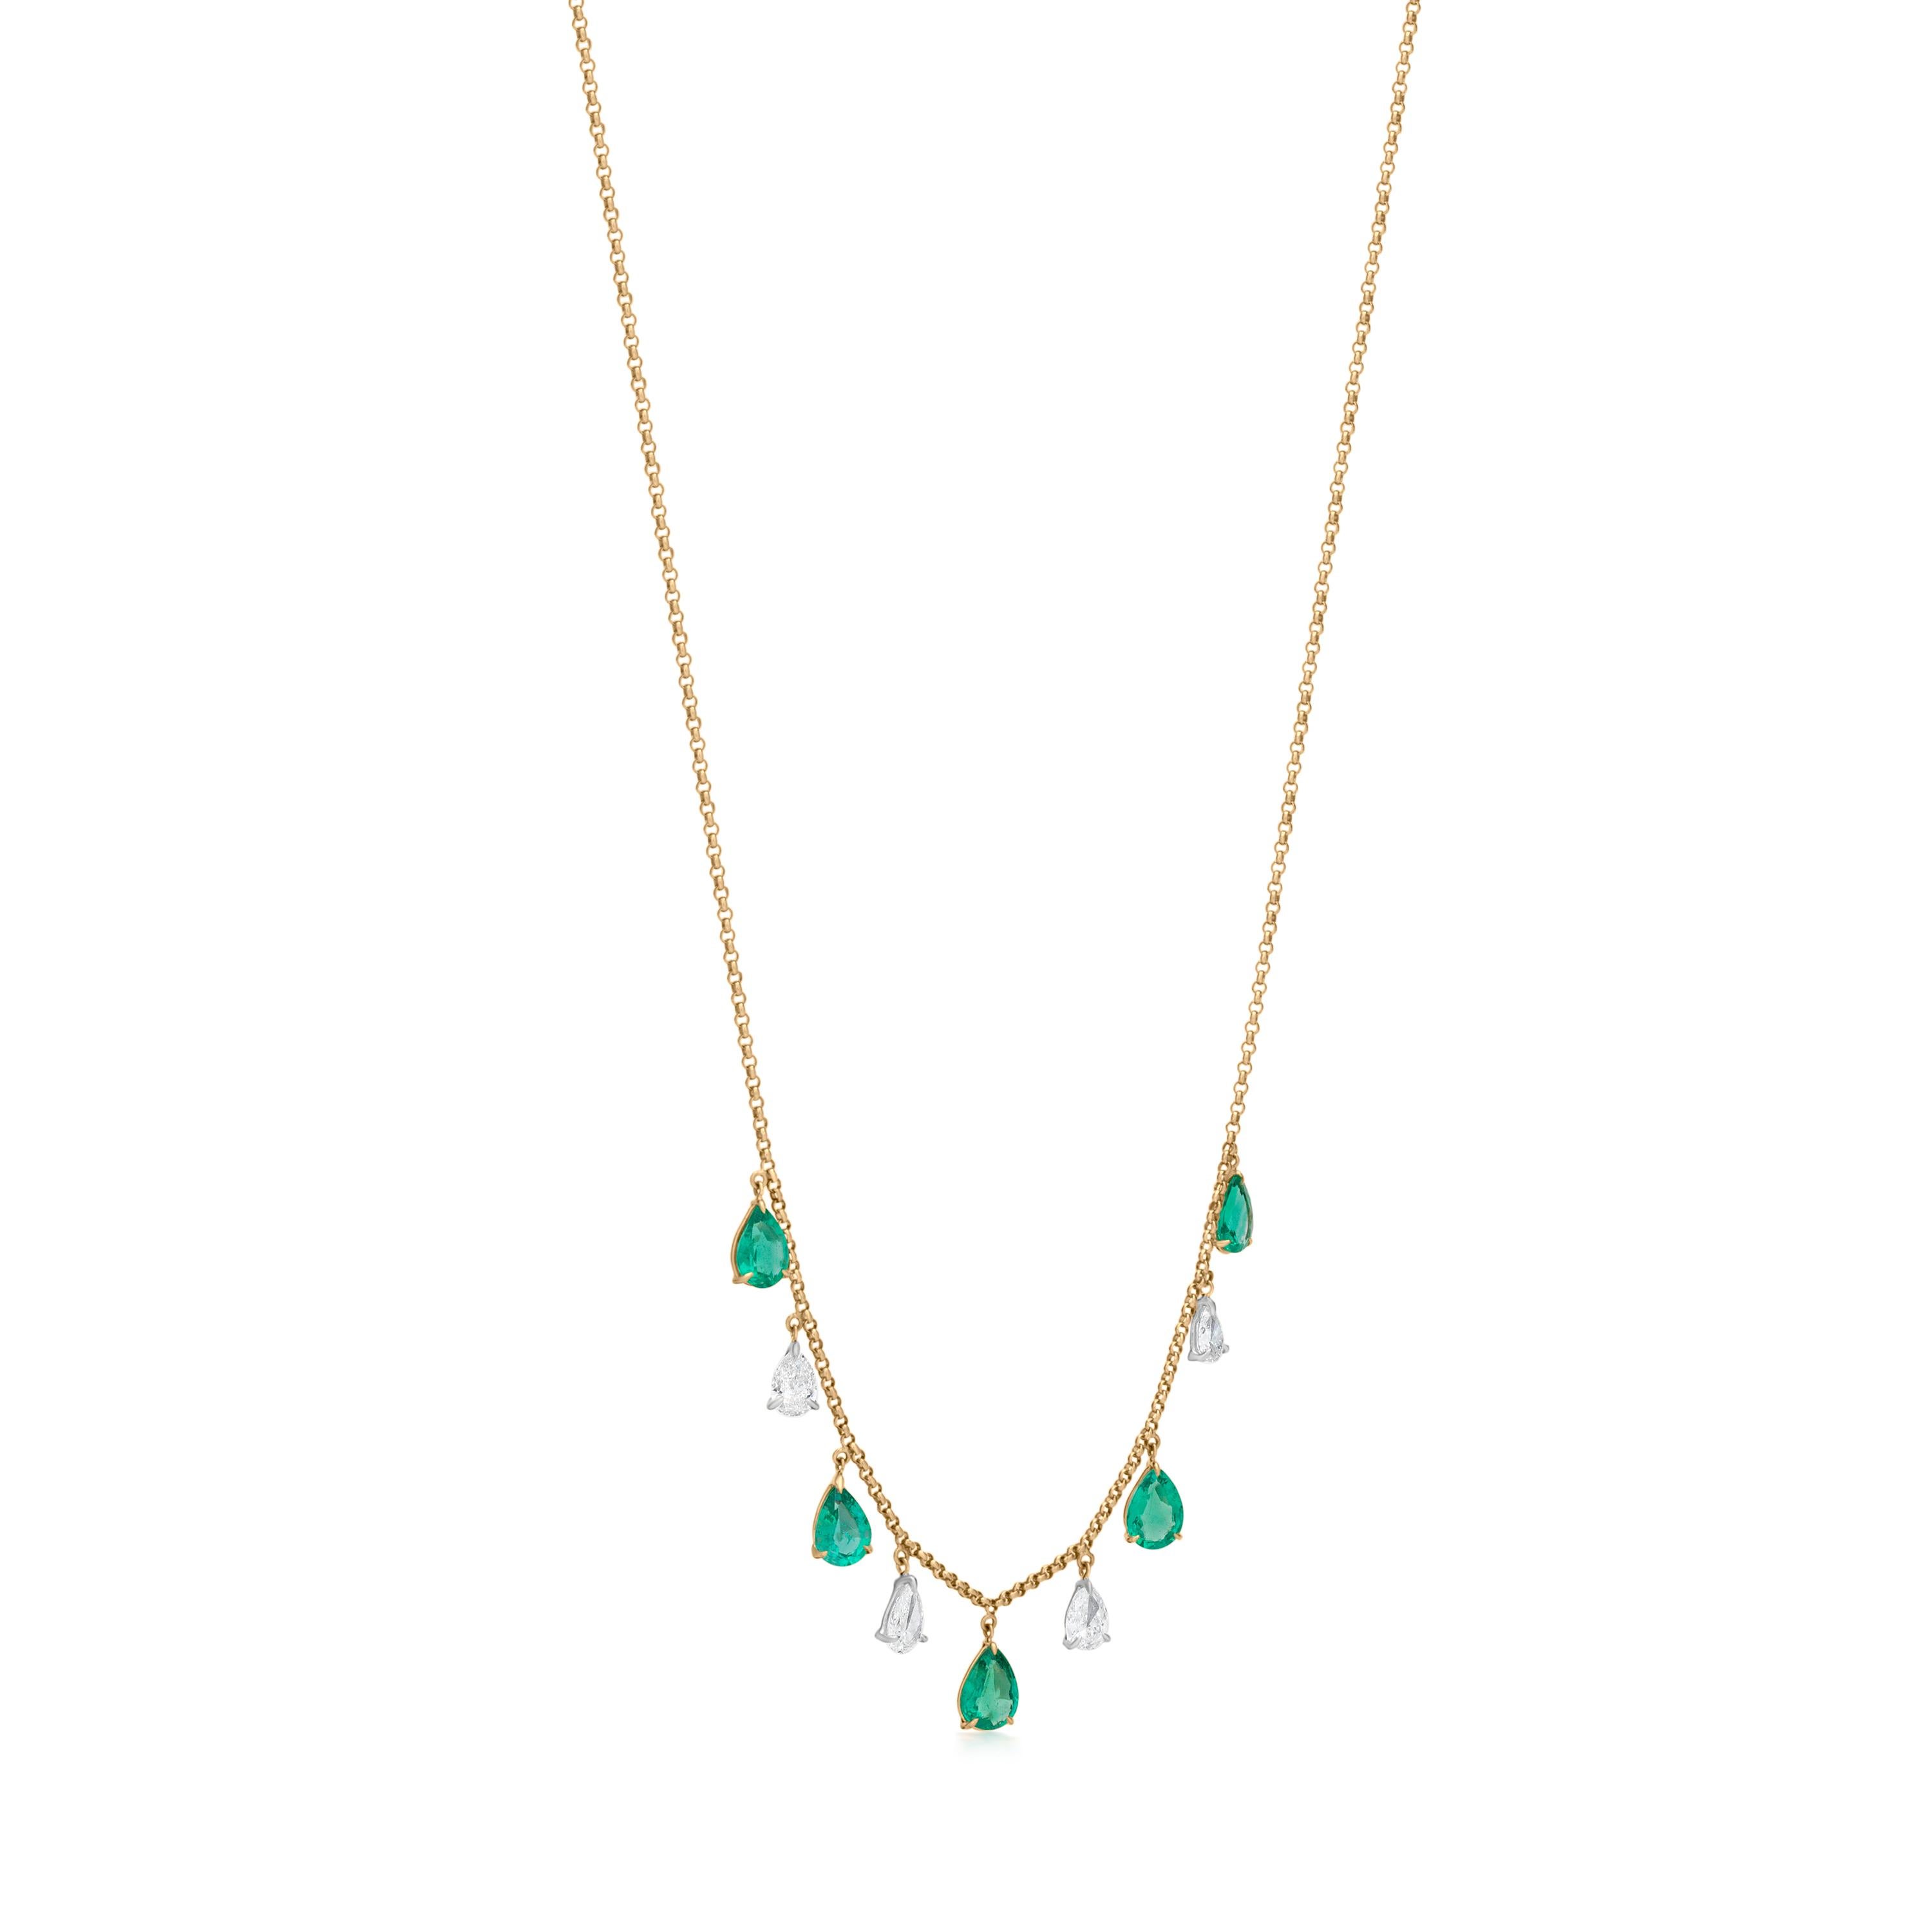 Contemporary Nigaam 3.51cttw Pear-Shaped Emerald & Diamond Drop Necklace in 18k Yellow Gold